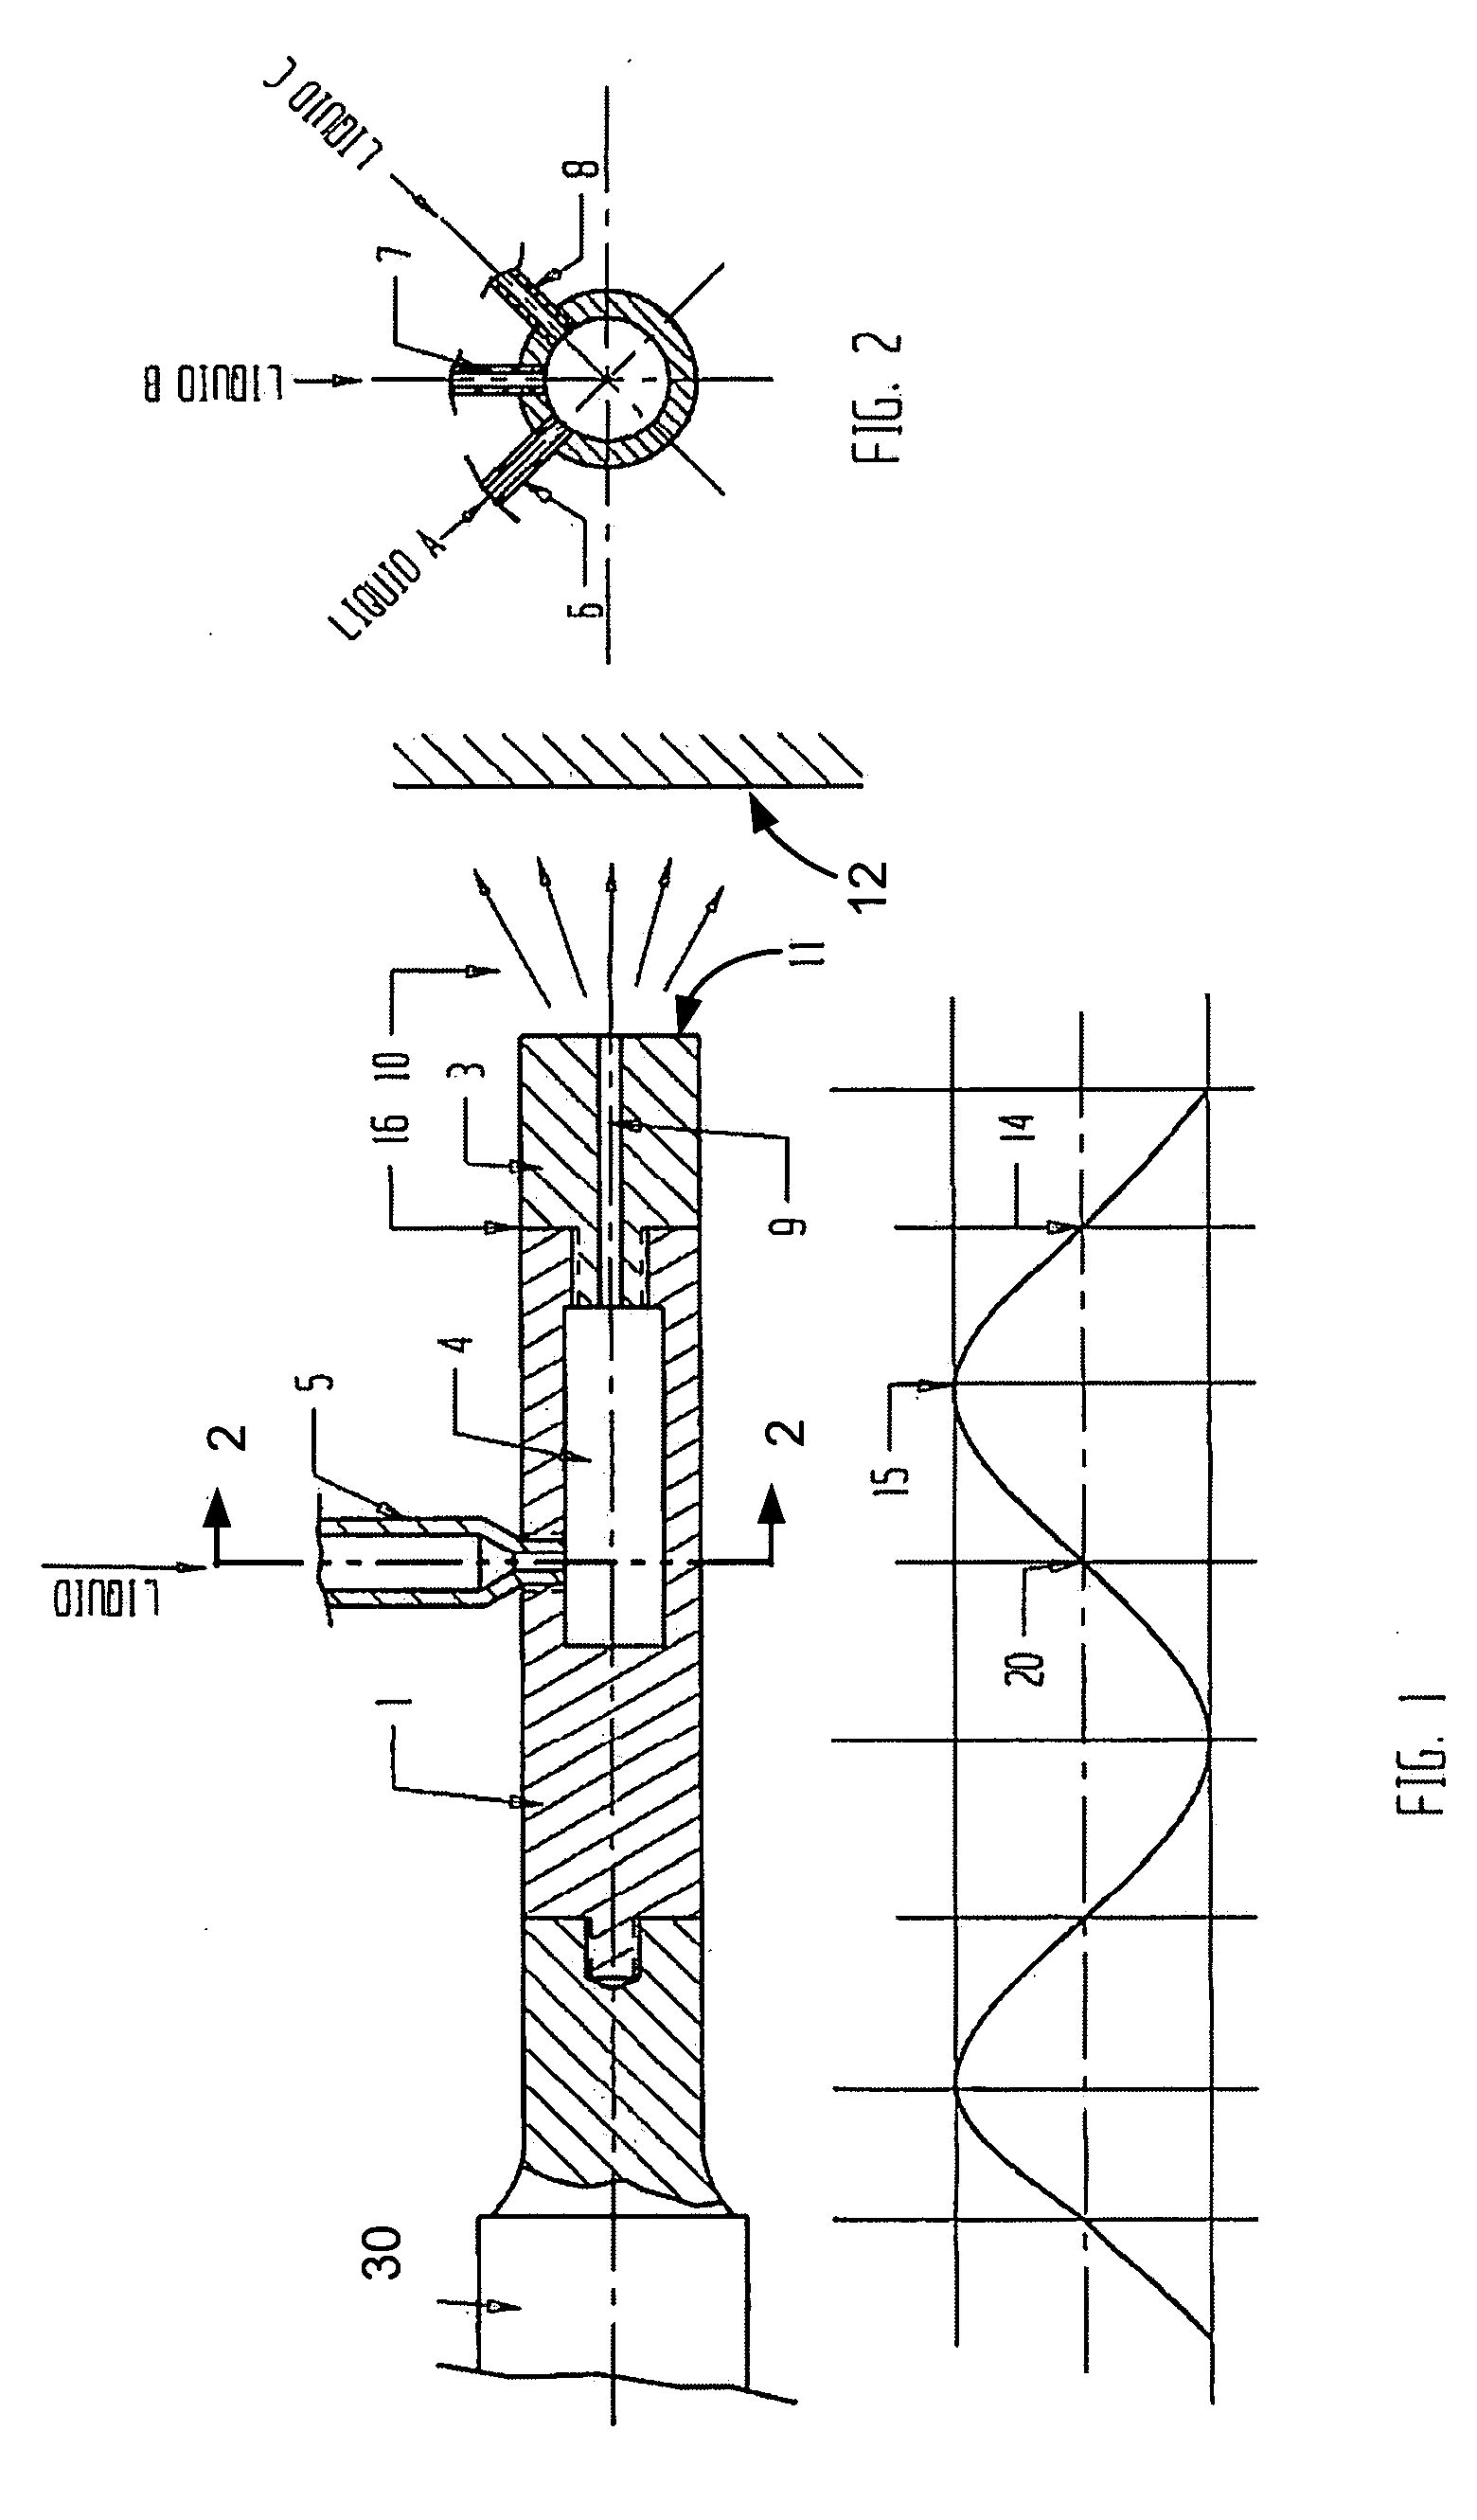 Ultrasound methods for mixing liquids and coating medical devices